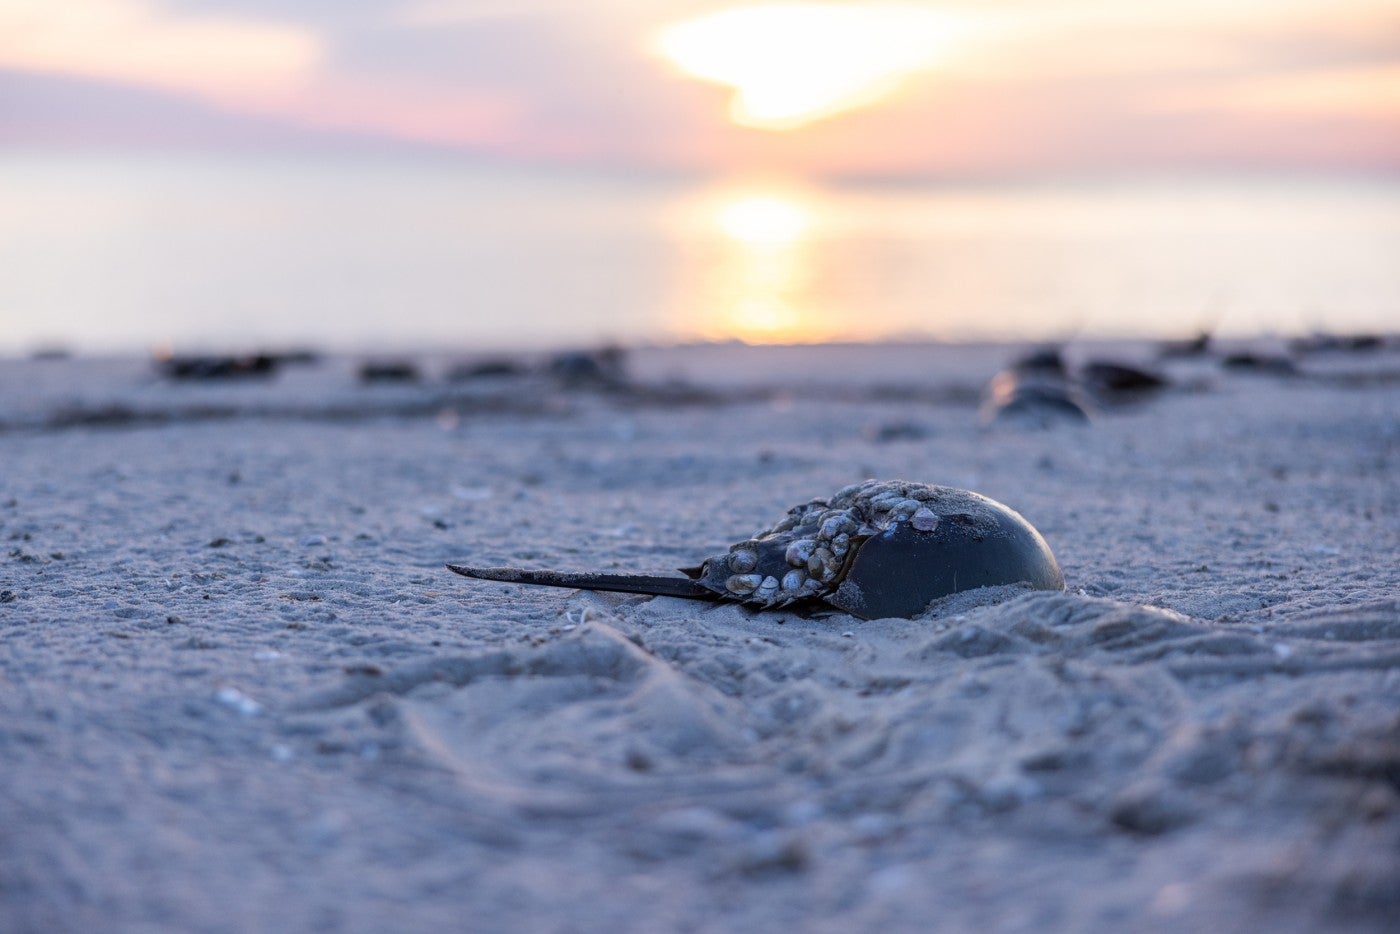 A horseshoe crab on a sandy beach at sunset